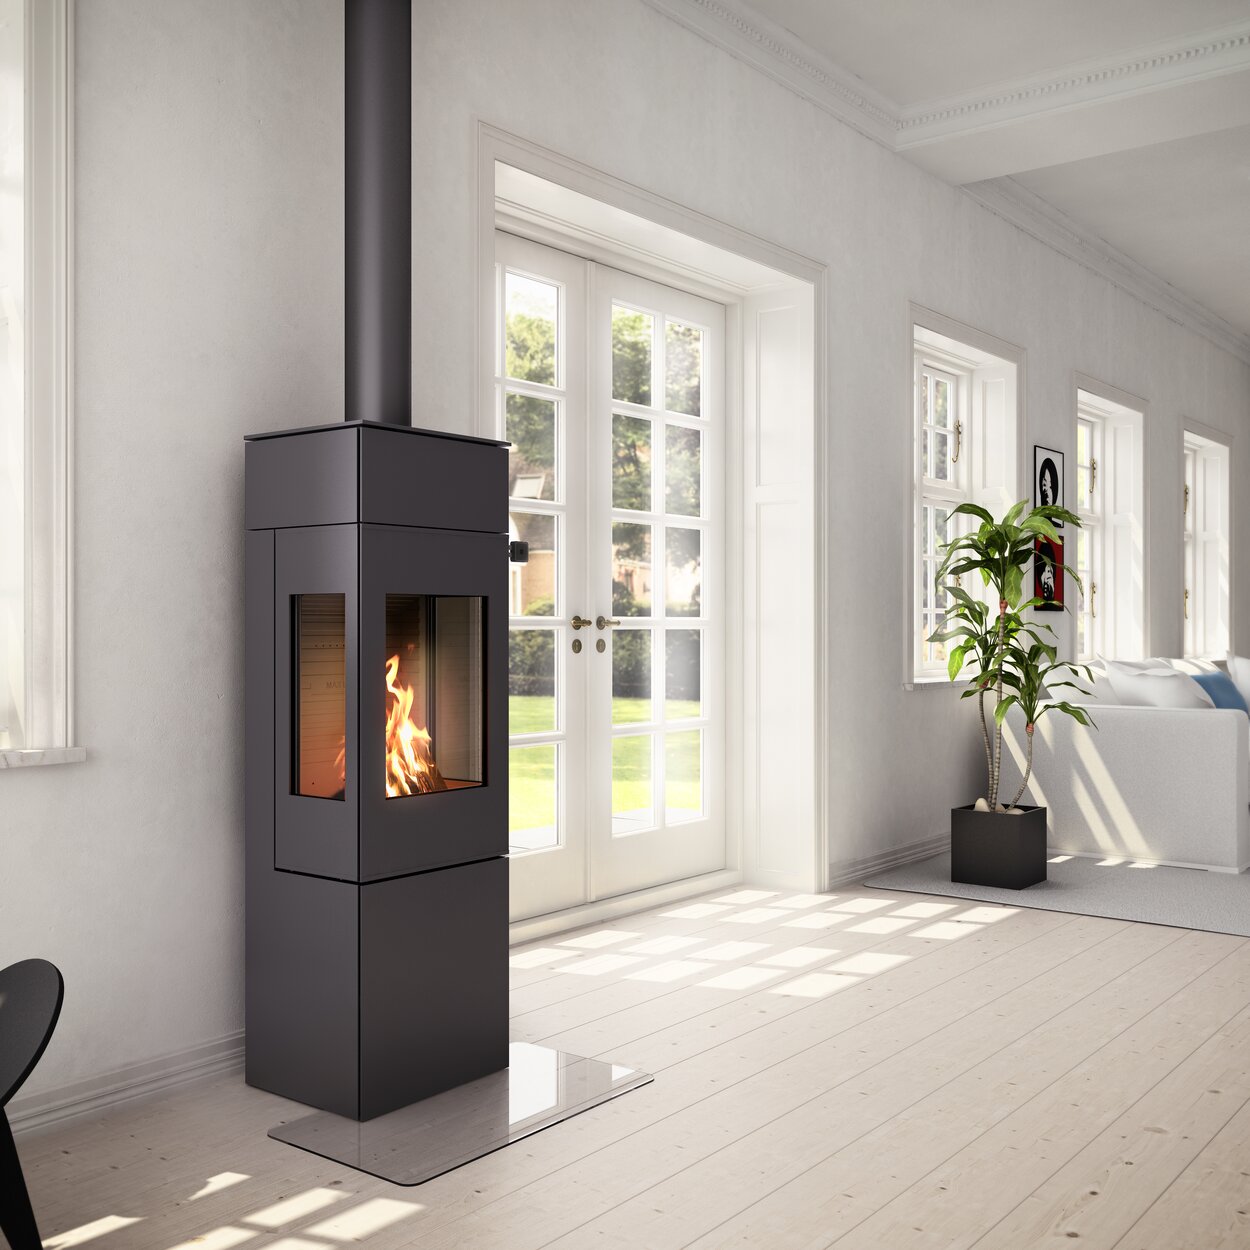 Wood stove NEXO 140 in black with steel door and two side windows in a bright living room area